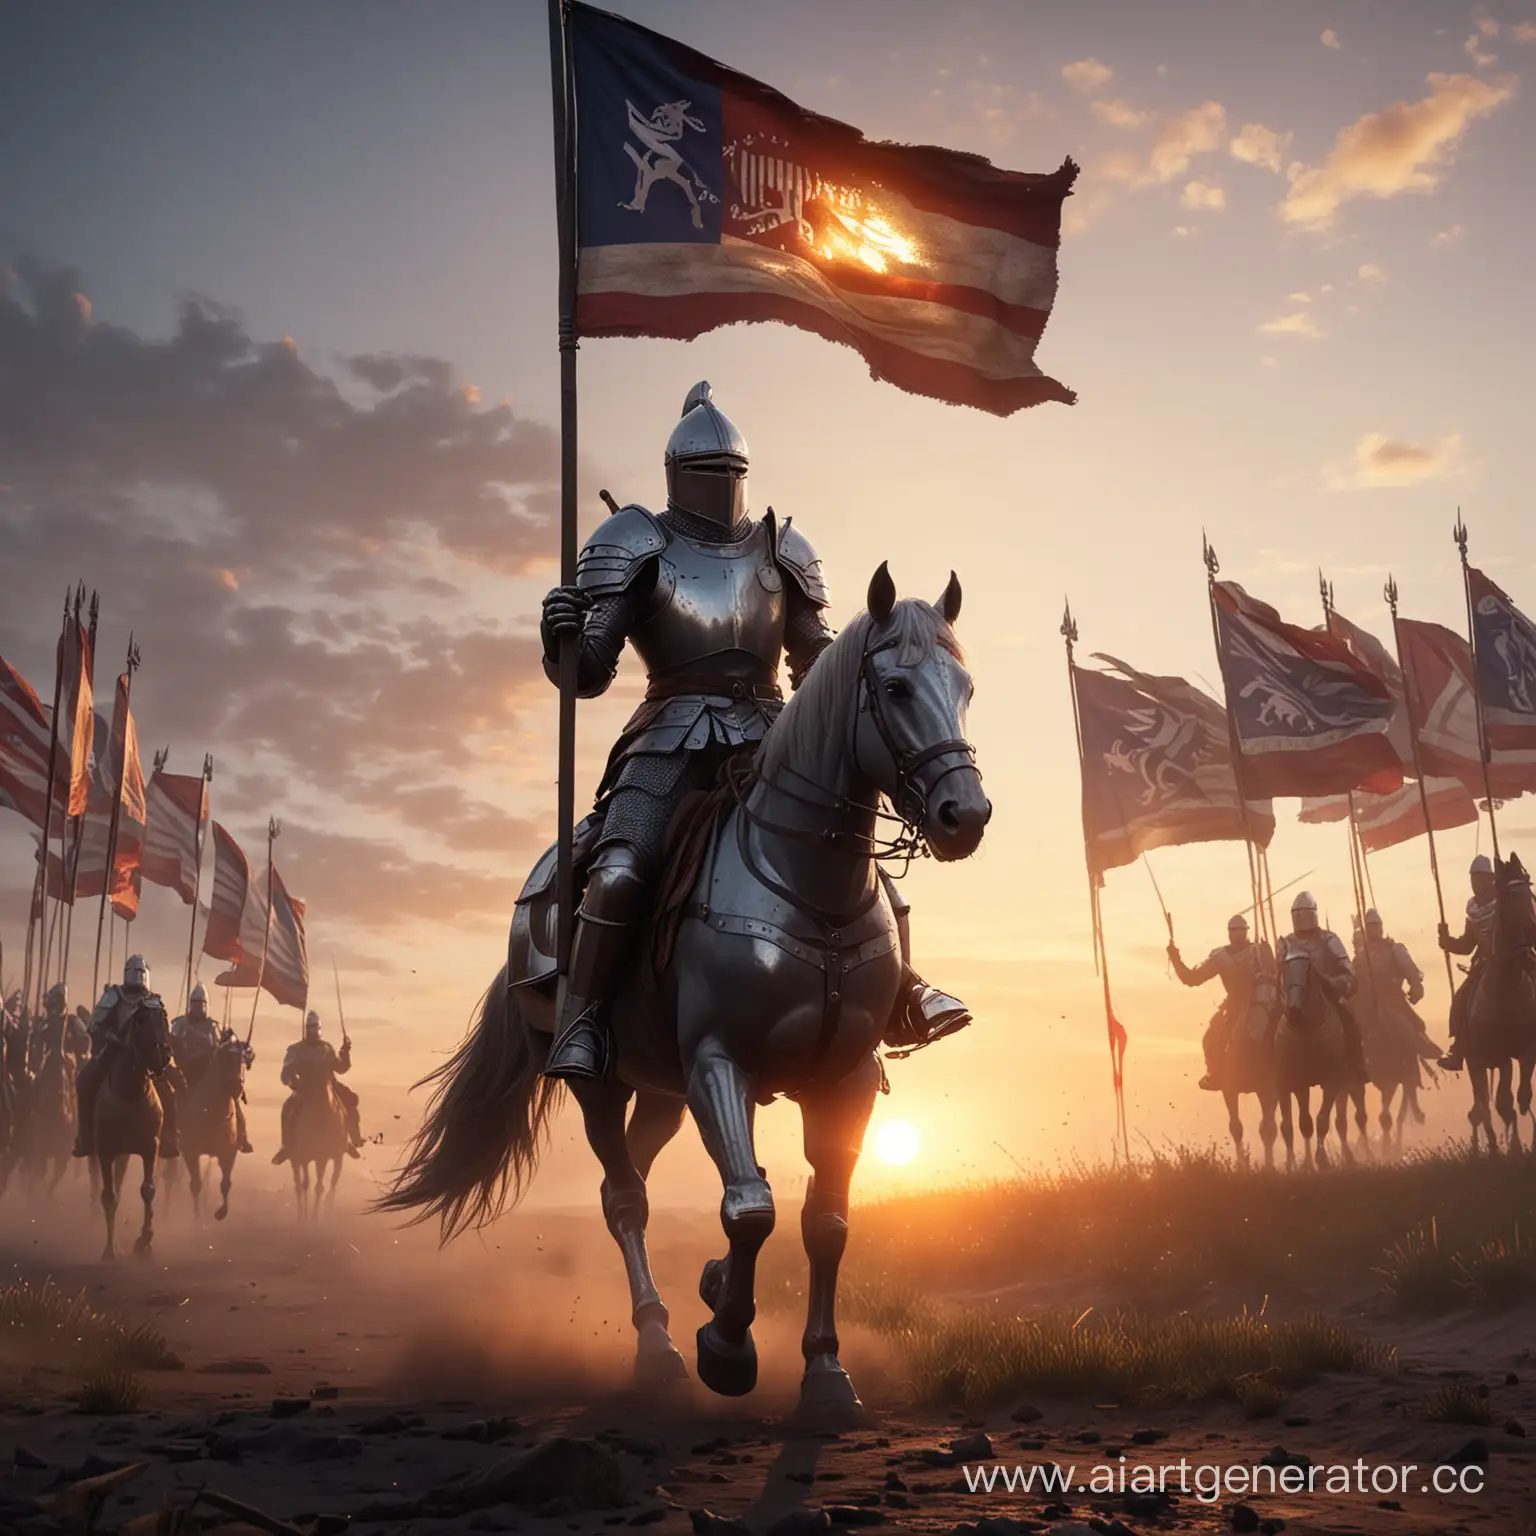 Dawn-Battle-Knight-in-Shining-Armor-on-the-Battlefield-with-Waving-Flags-4K